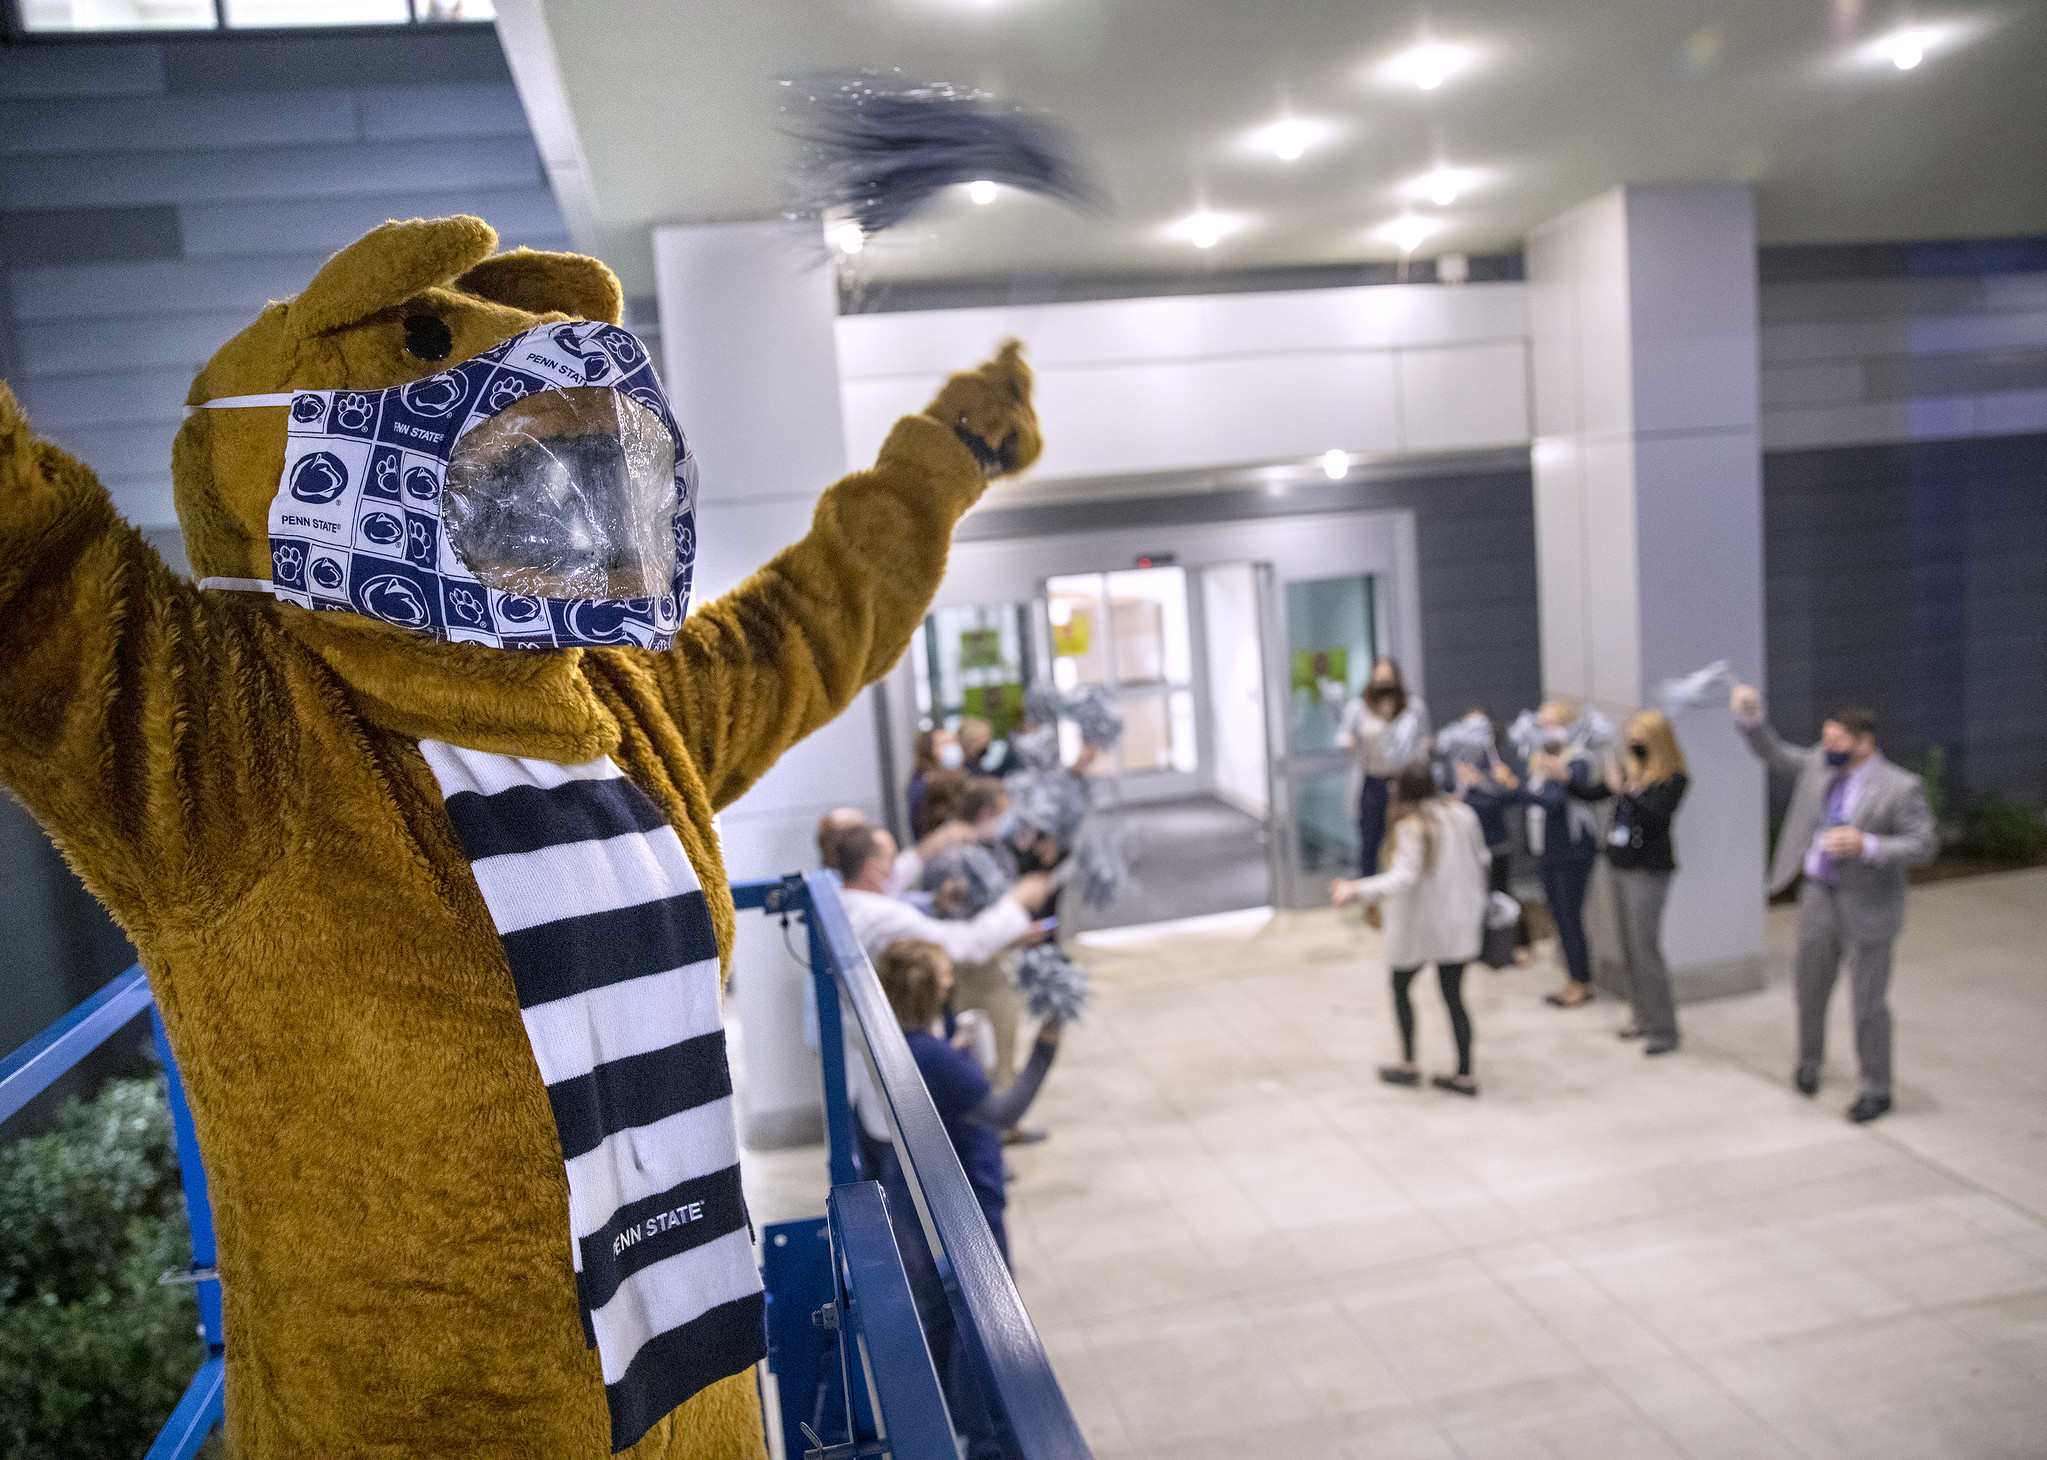 The Penn State Nittany Lion stands in the foreground, with several people in the background cheering as an individual walks through a doorway.